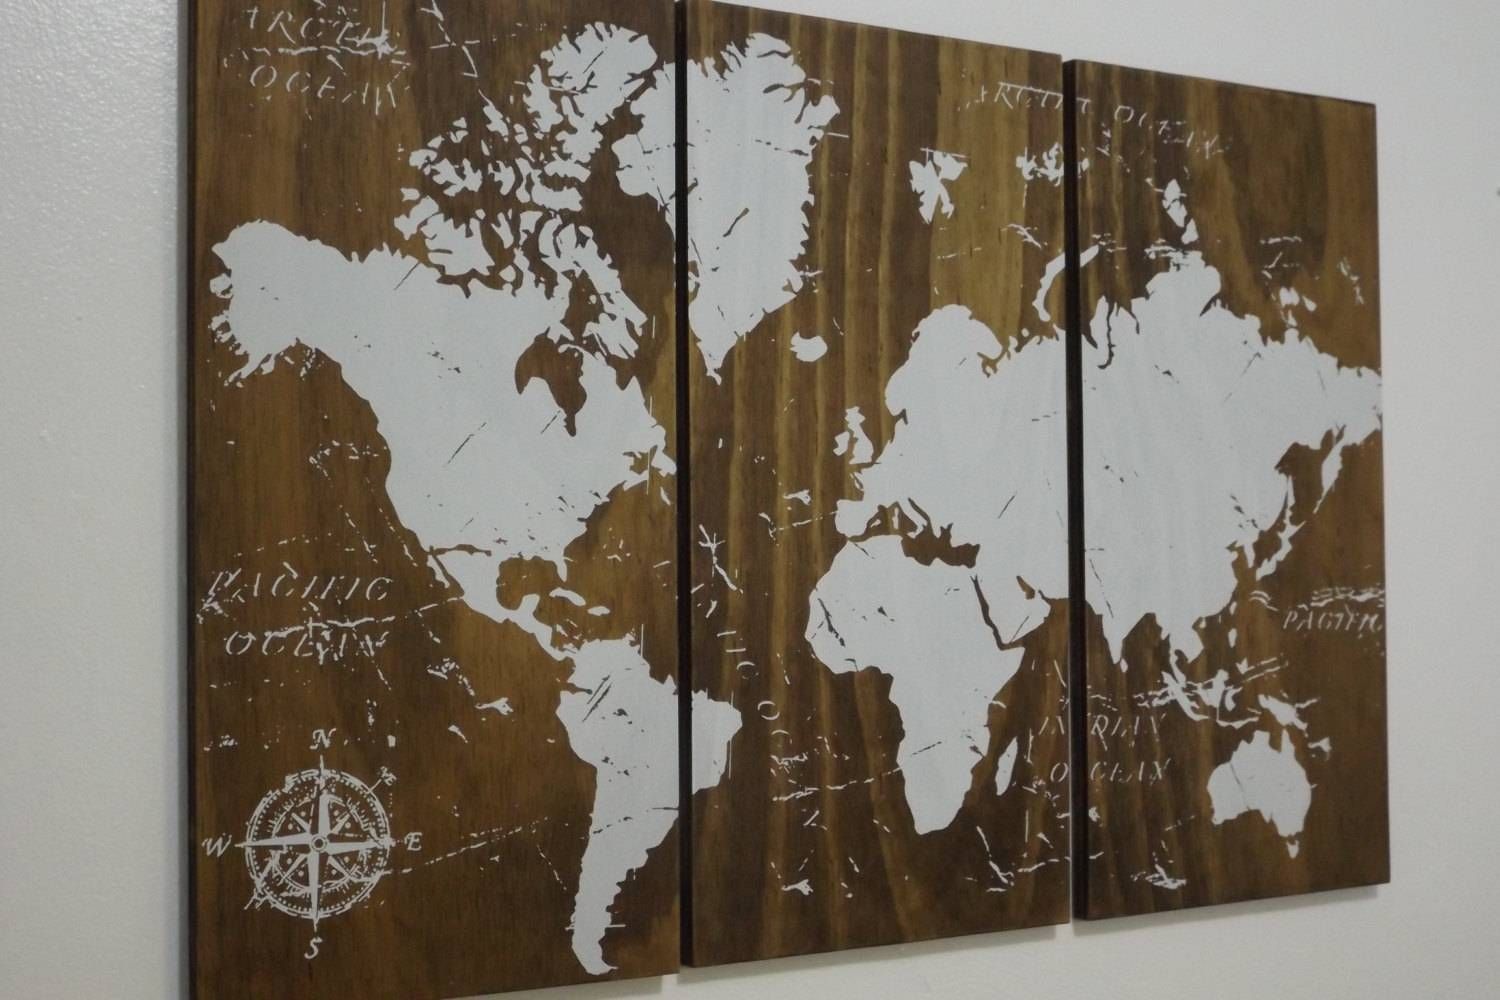 Old World Map Push Pin Travel Map Solid Wood Wall Art Intended For Current Old World Map Wall Art (View 2 of 20)